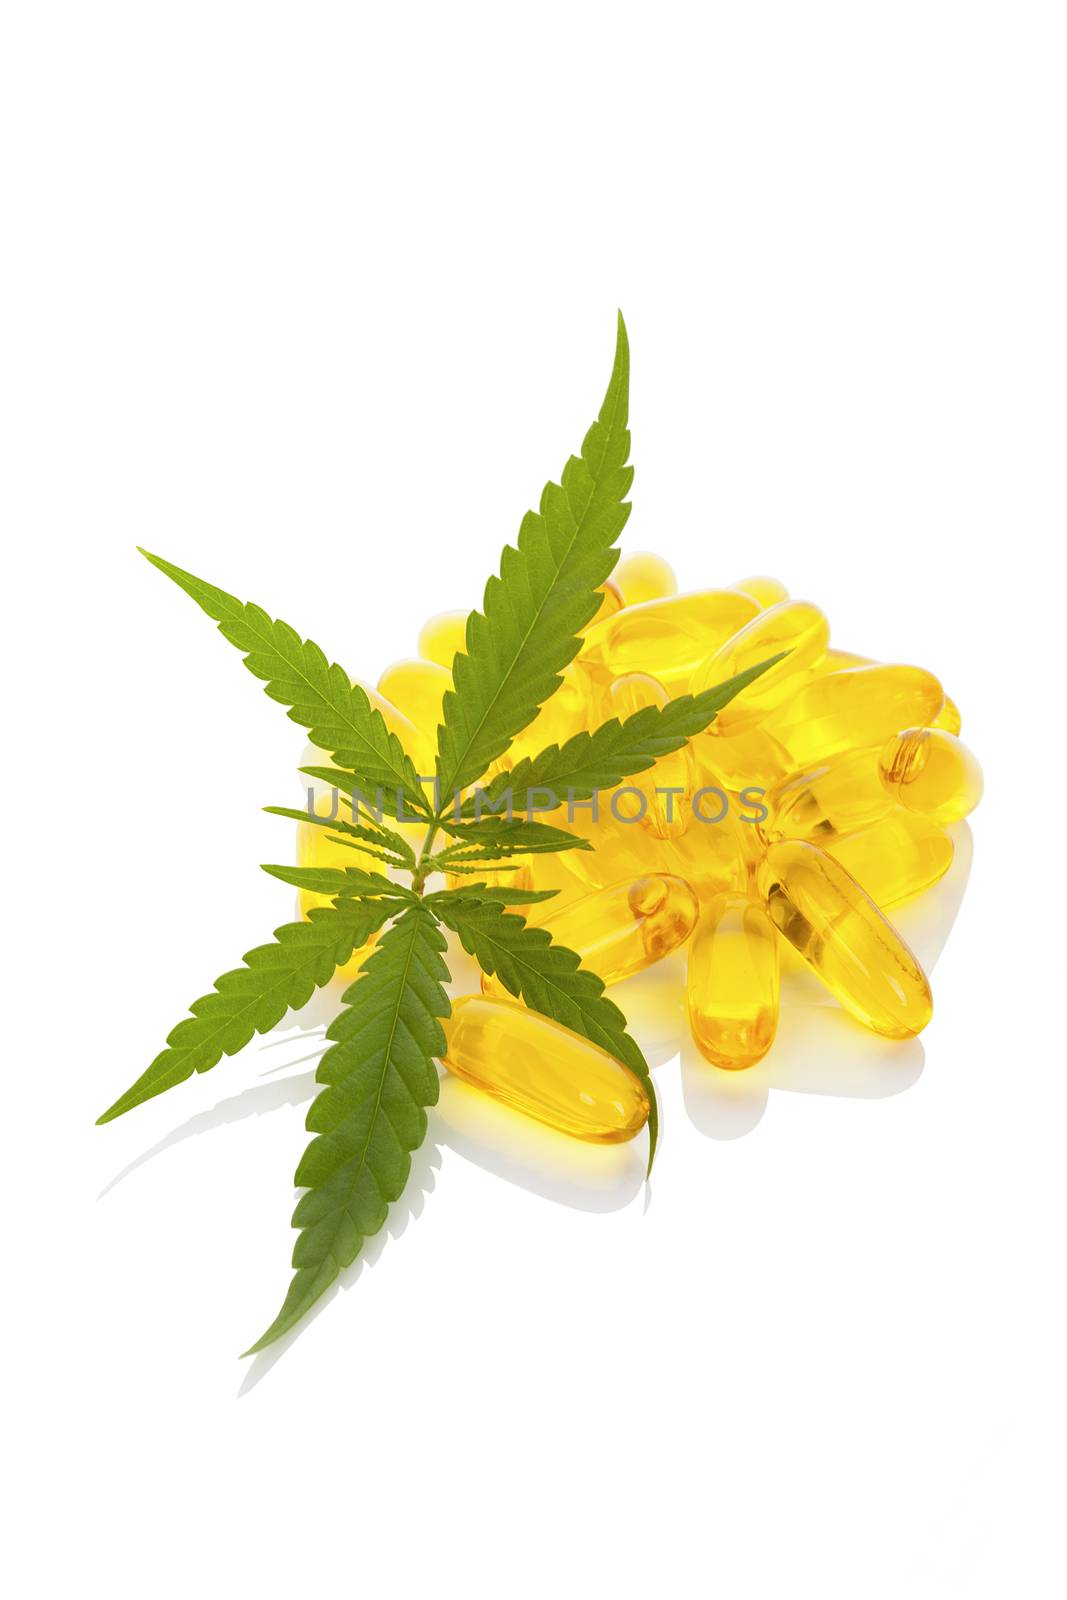 Medical marijuana. Cannabis leaf and tablets isolated on white background.